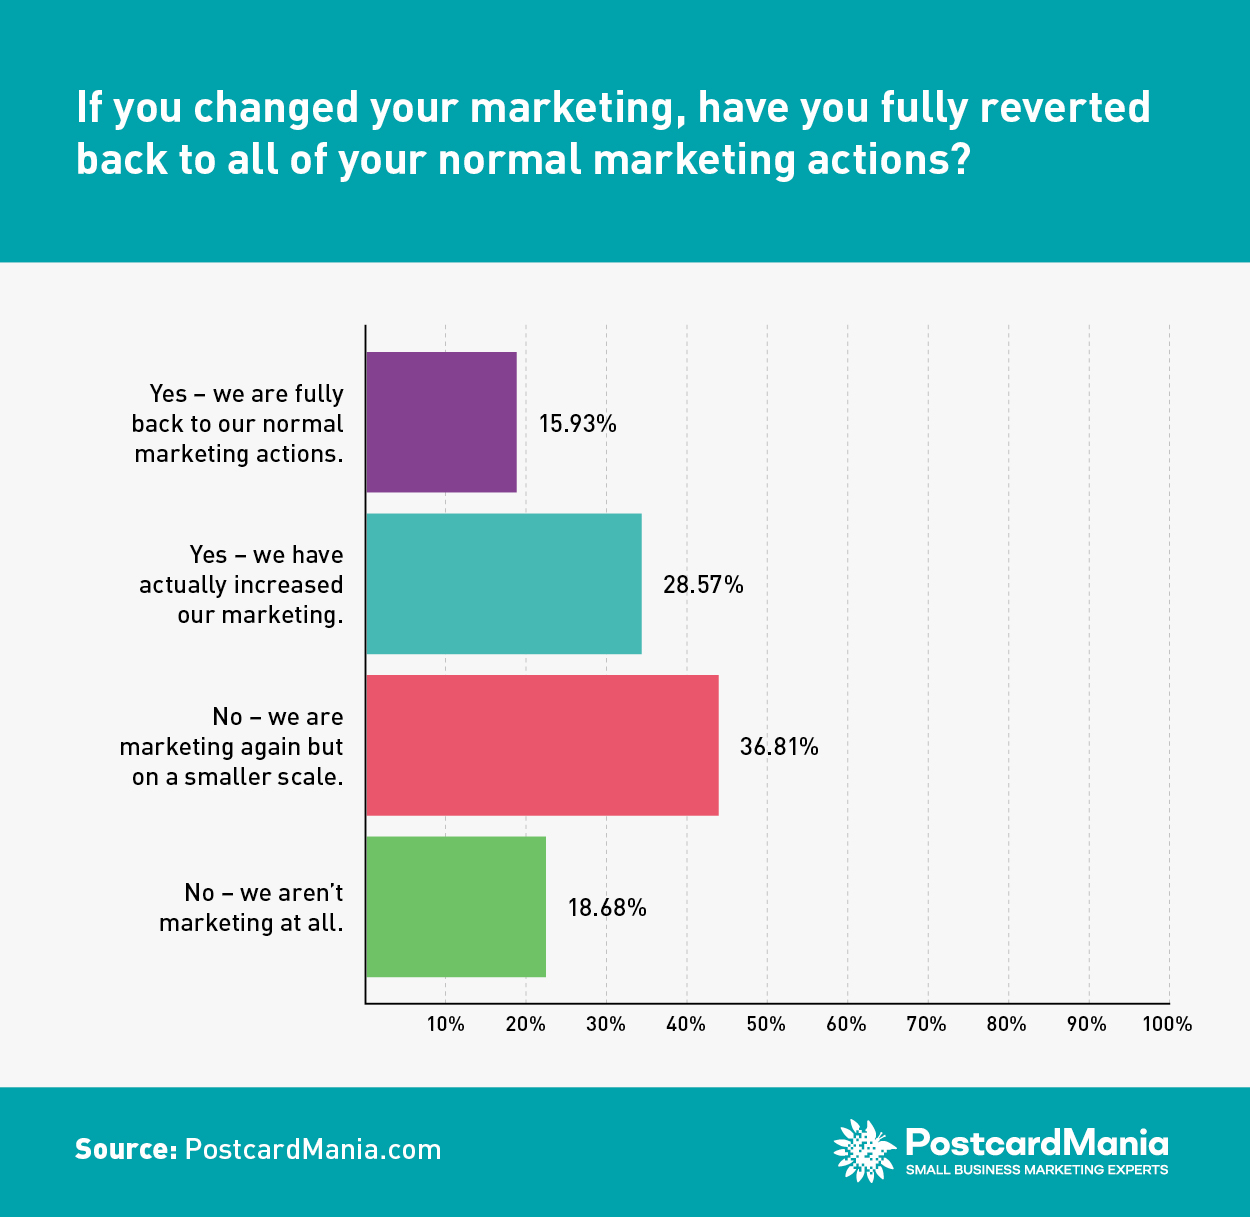 COVID Survey 8 - If you changed your marketing, have you fully reverted back to all of your normal marketing actions?